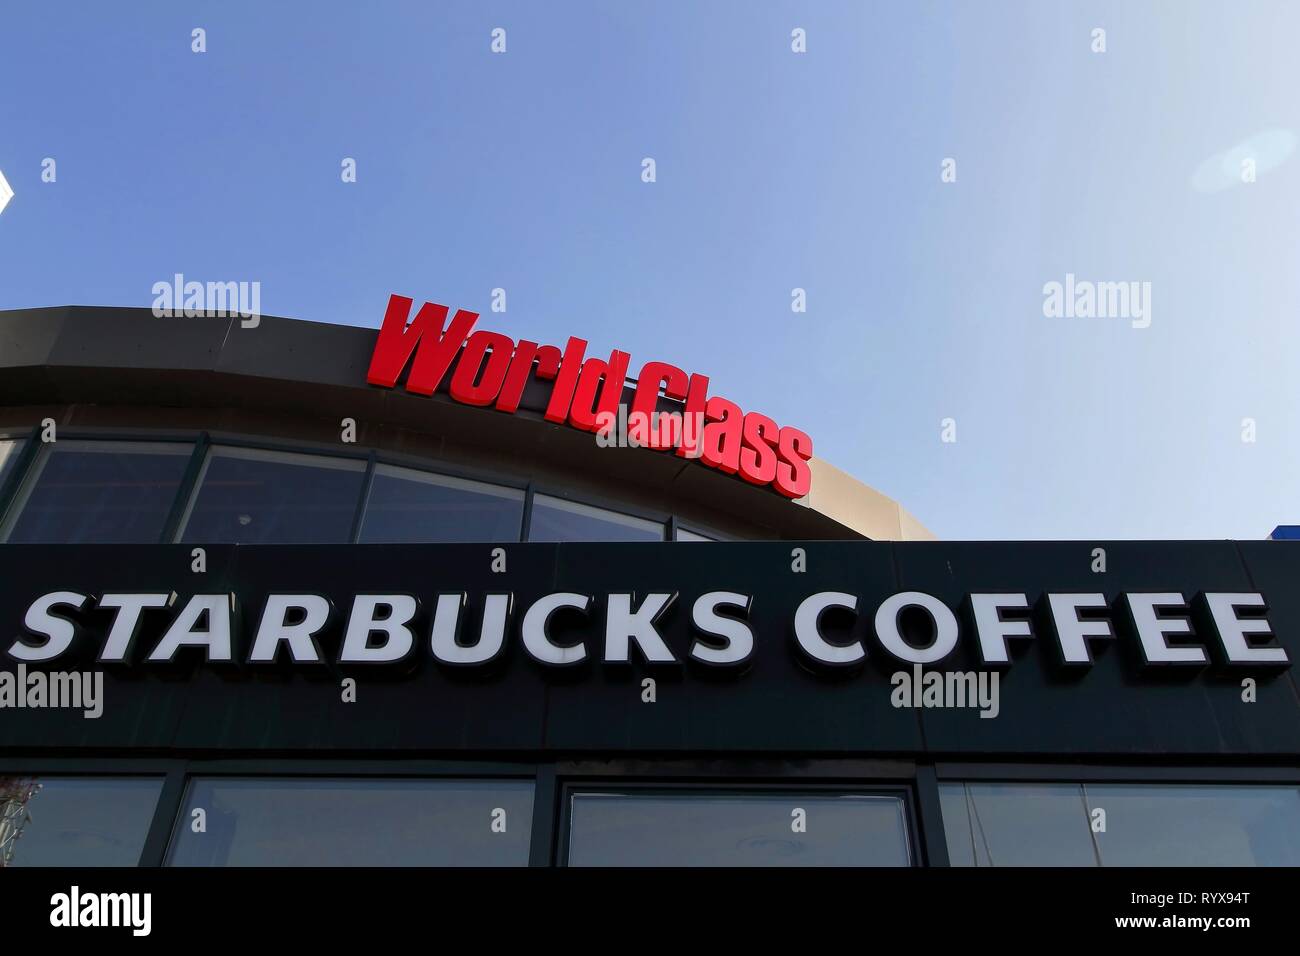 Bucharest, Romania - October 17, 2018: The signs of World Class fitness and Starbucks Coffee are present on a mall in Bucharest, Romania. This image i Stock Photo